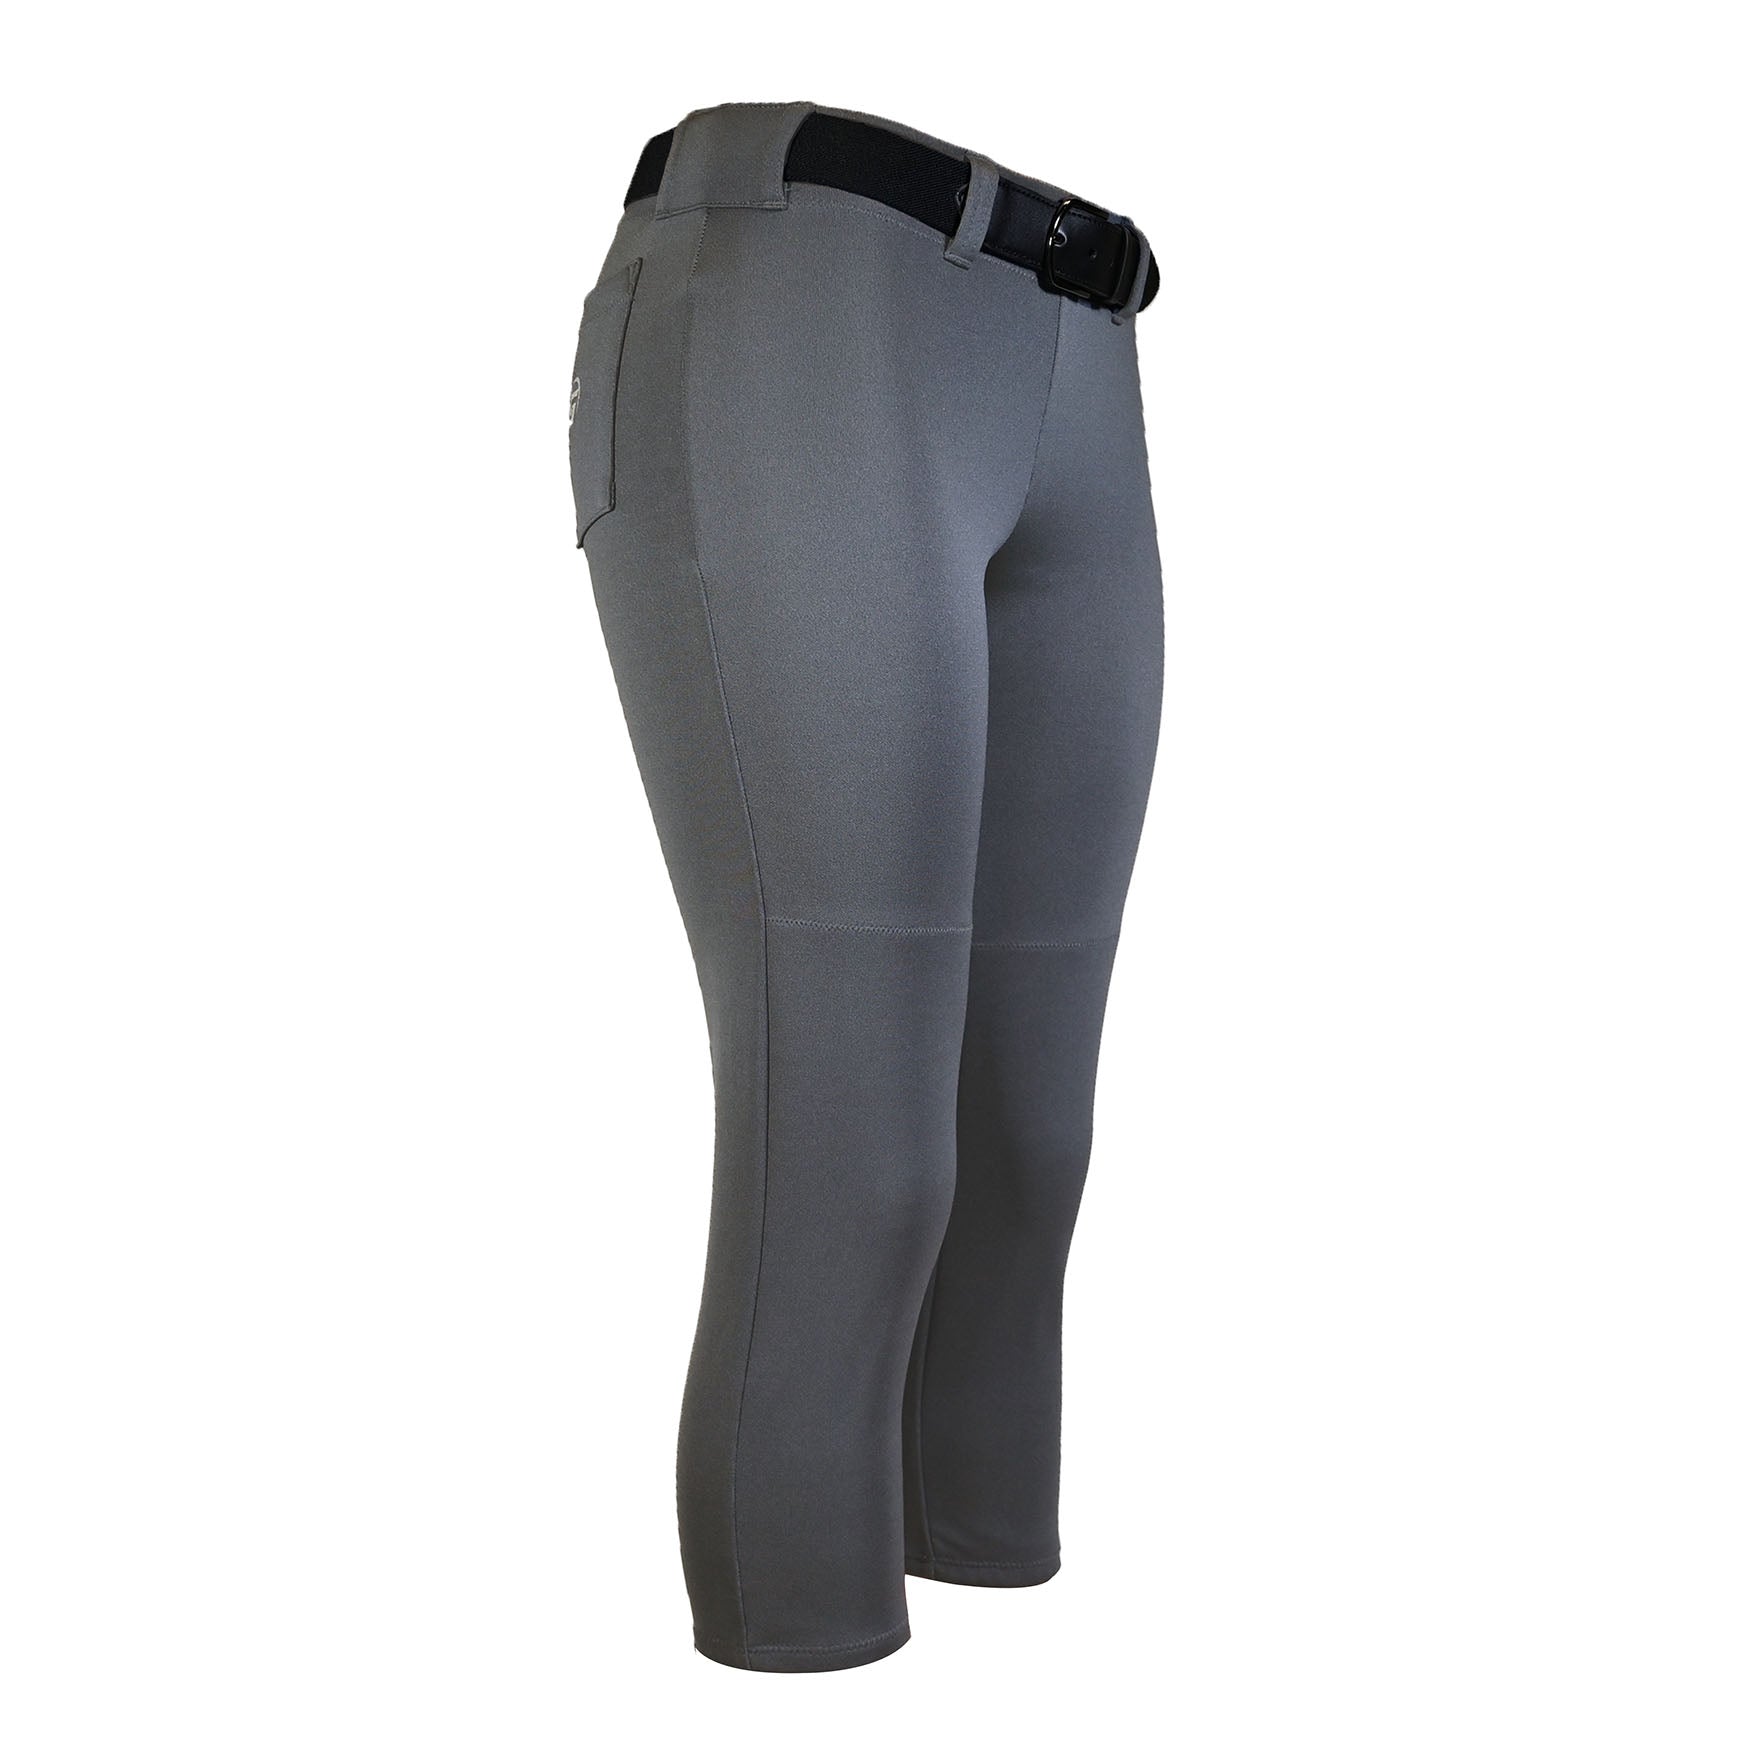 6 things that make a great Softball Pant – TheGluv Athletique